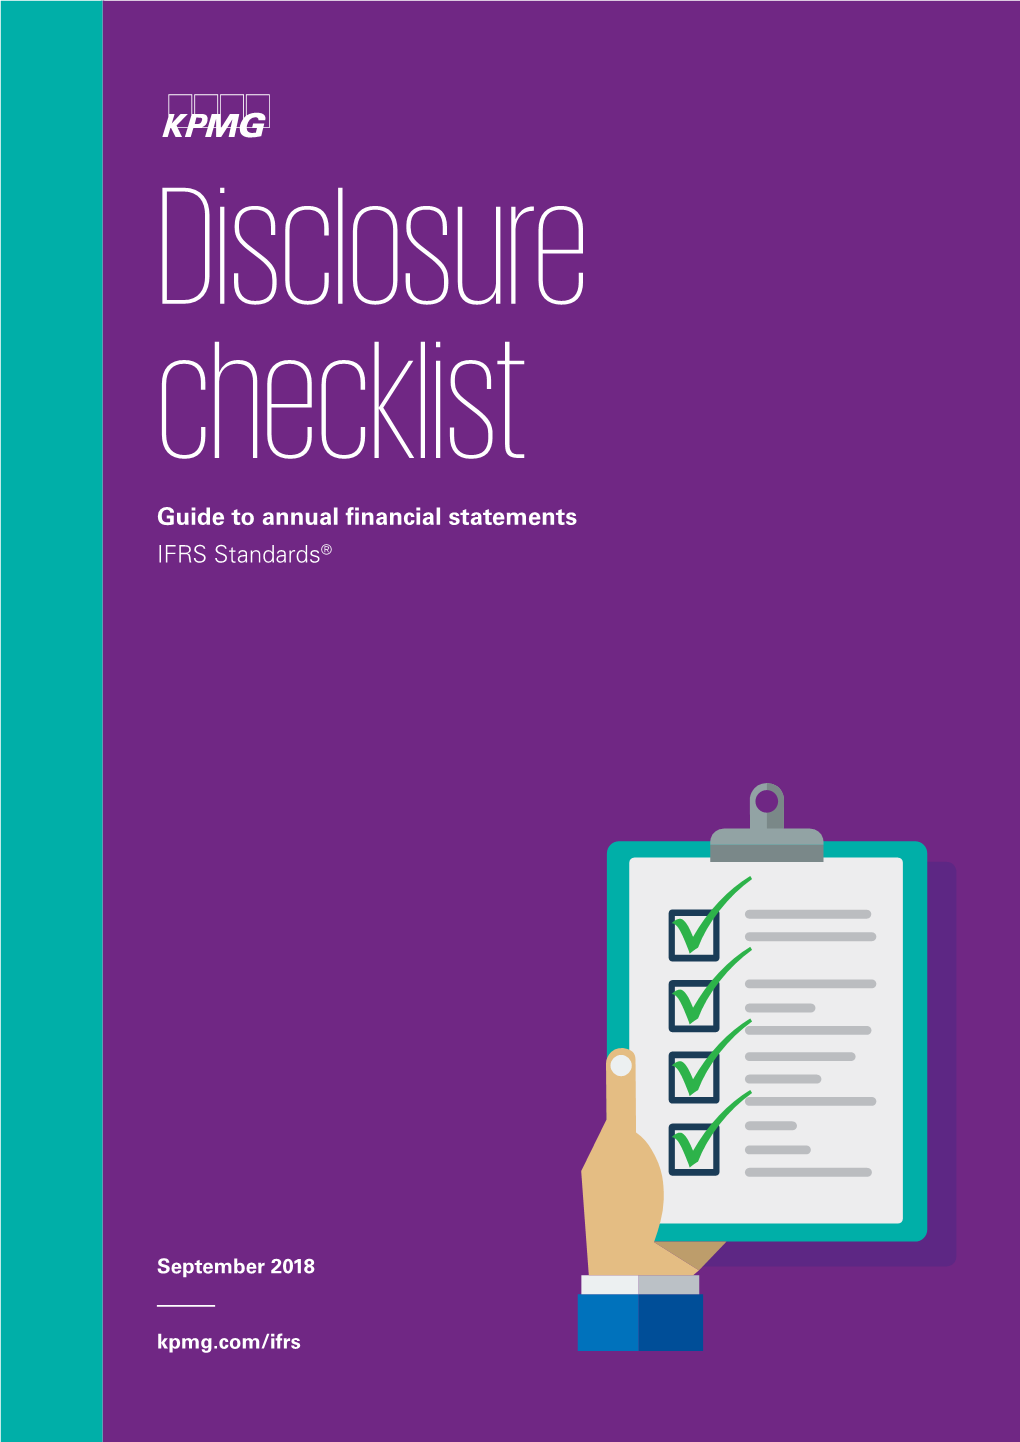 Guide to Annual Financial Statements – Disclosure Checklist 2018